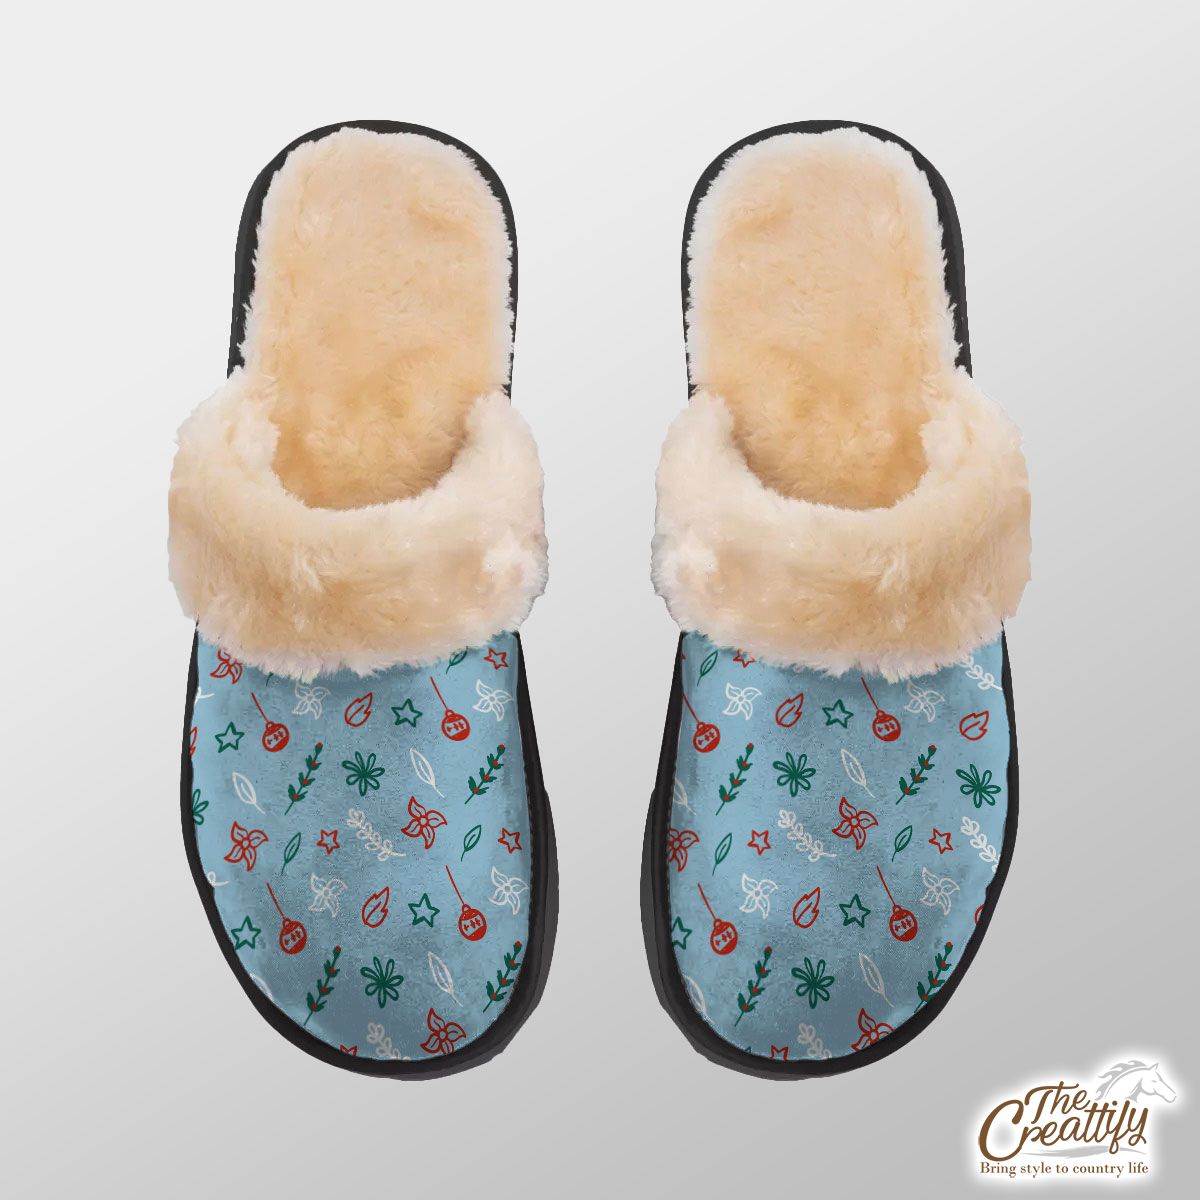 Christmas Lights, Candy Cane And Holly Tree  3 Home Plush Slippers